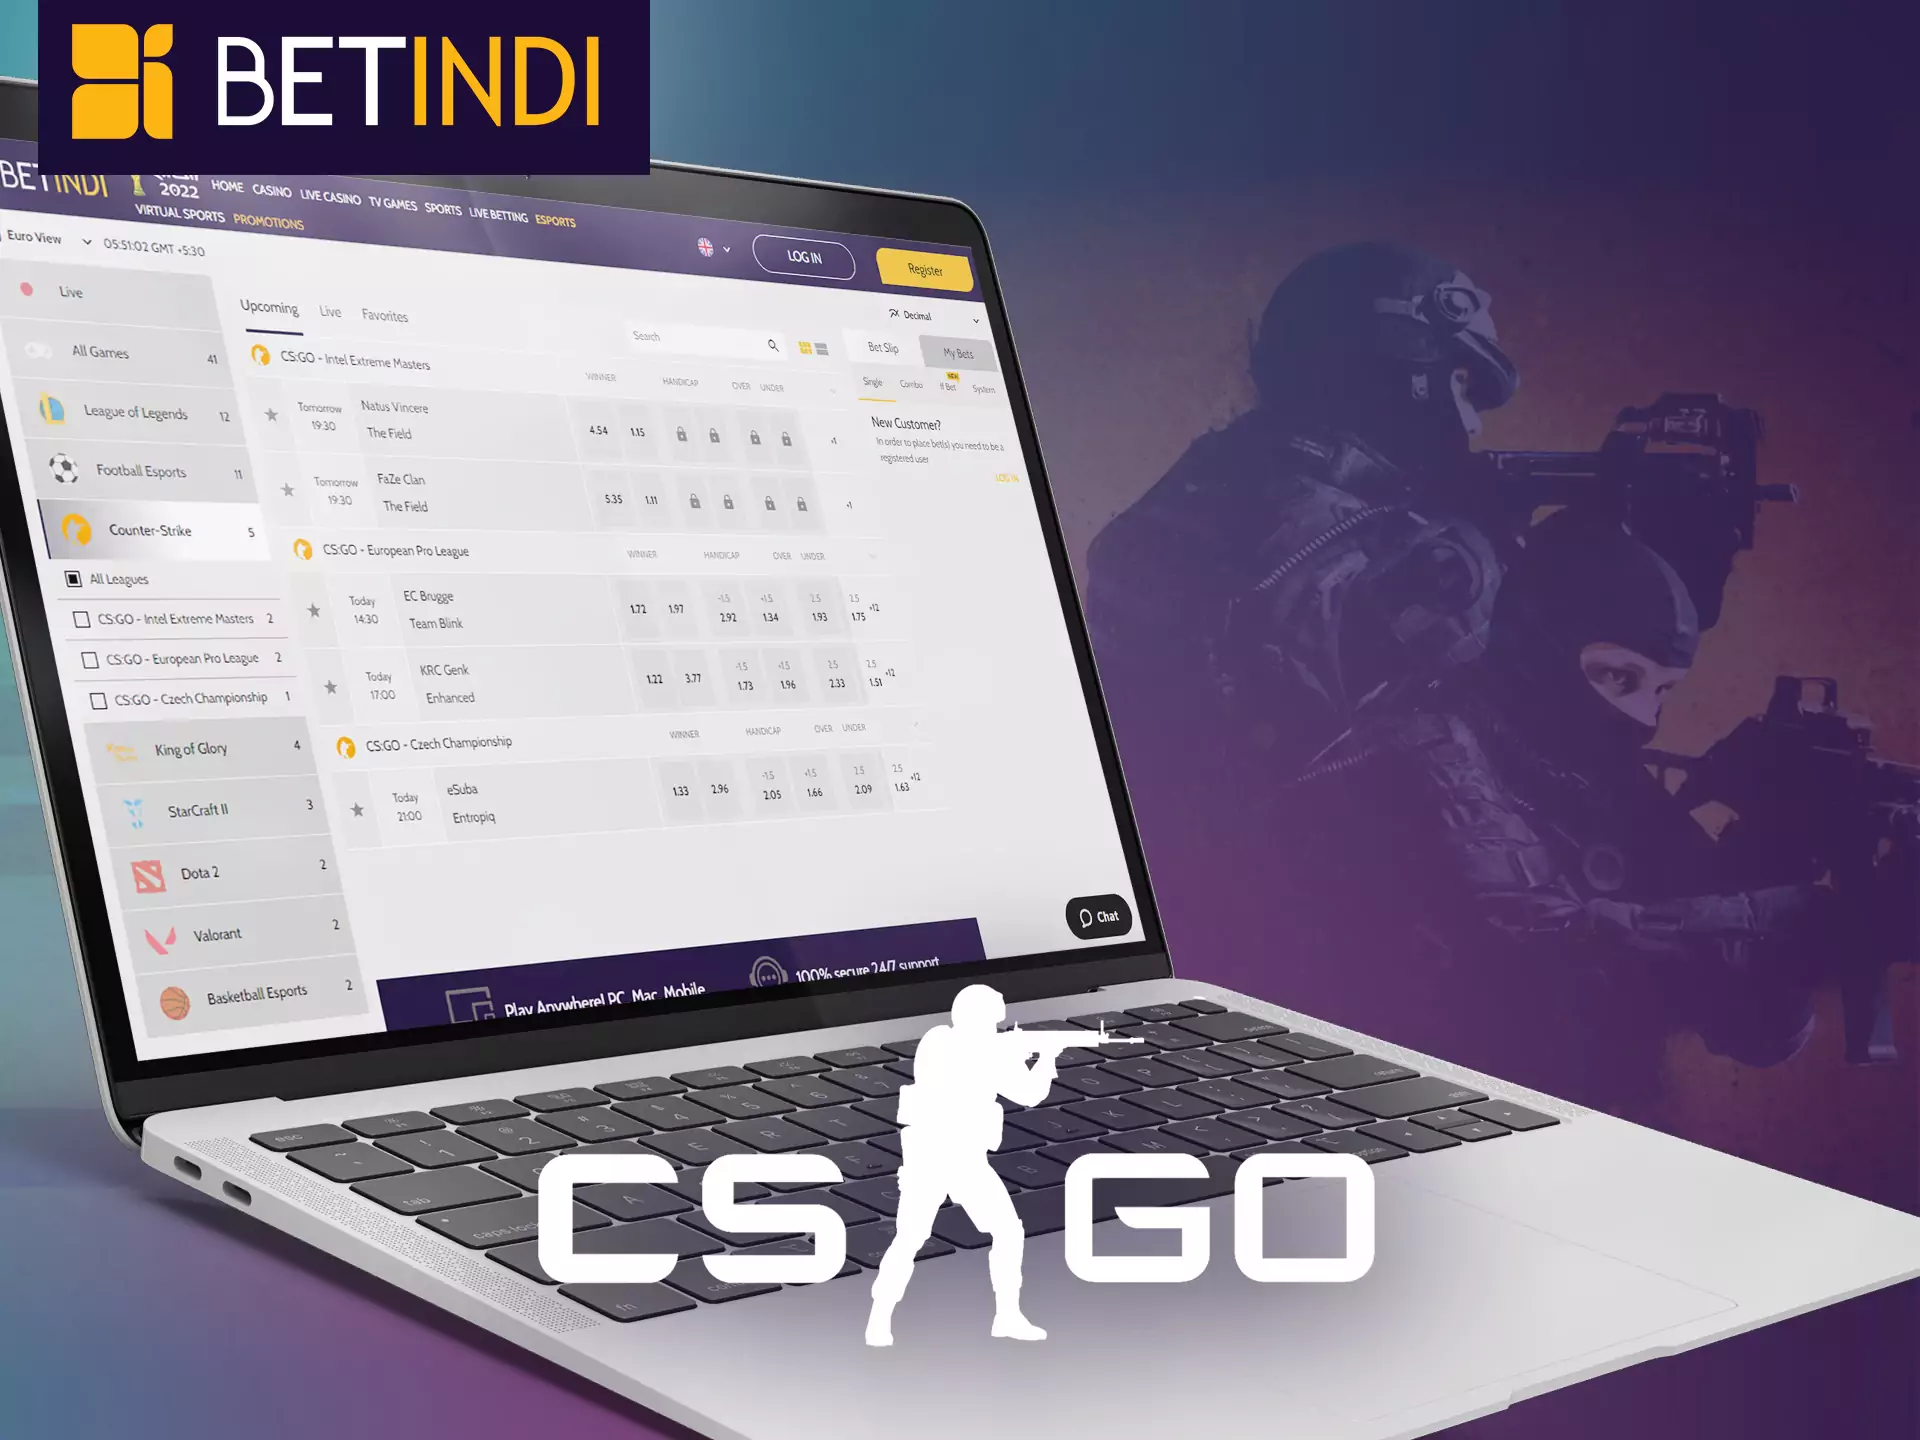 Betindi offers fans to bet on CS:GO.